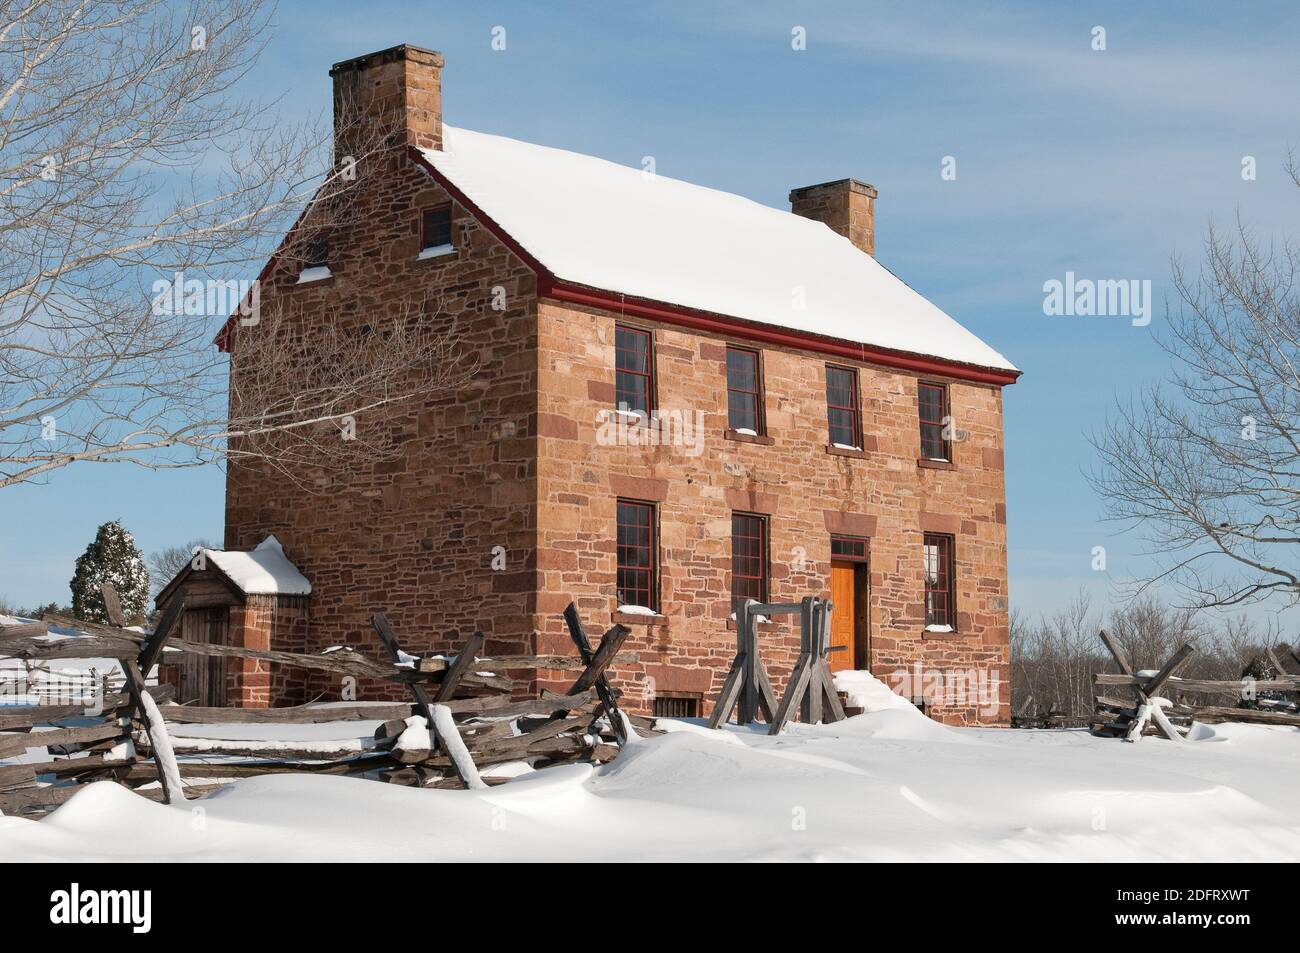 The Stone House at Manassas National Battlefield is blanketed in snow during winter. Stock Photo